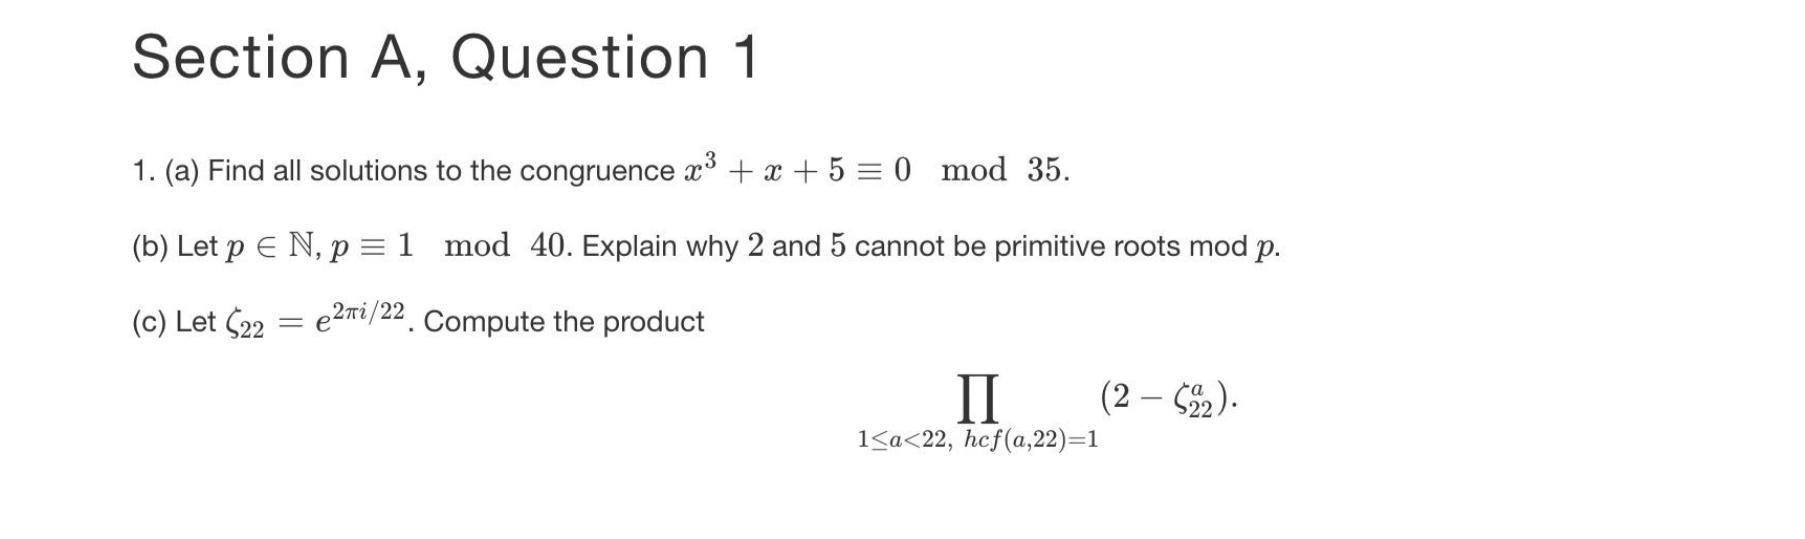 Section A Question 1 1 A Find All Solutions To The Congruence X3 X 5 0 Mod 35 B Let P E N P 1 Mod 40 Ex 1